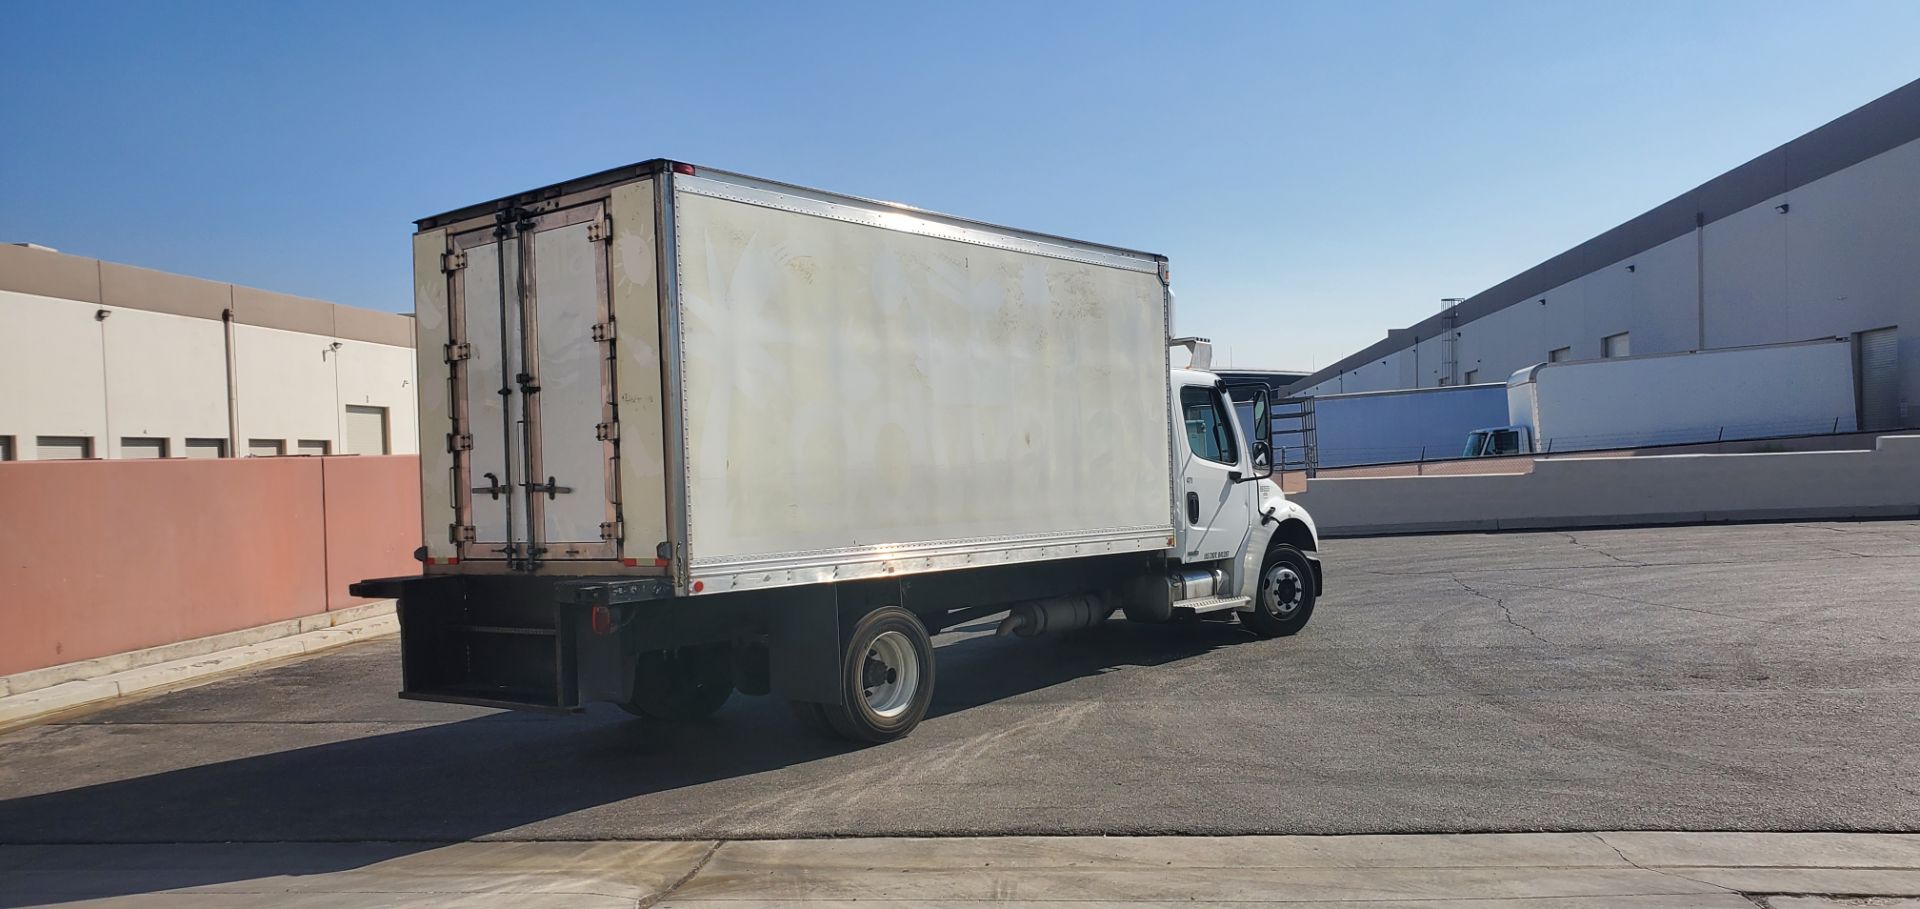 2005 Freightliner refrigerated truck - Image 4 of 11